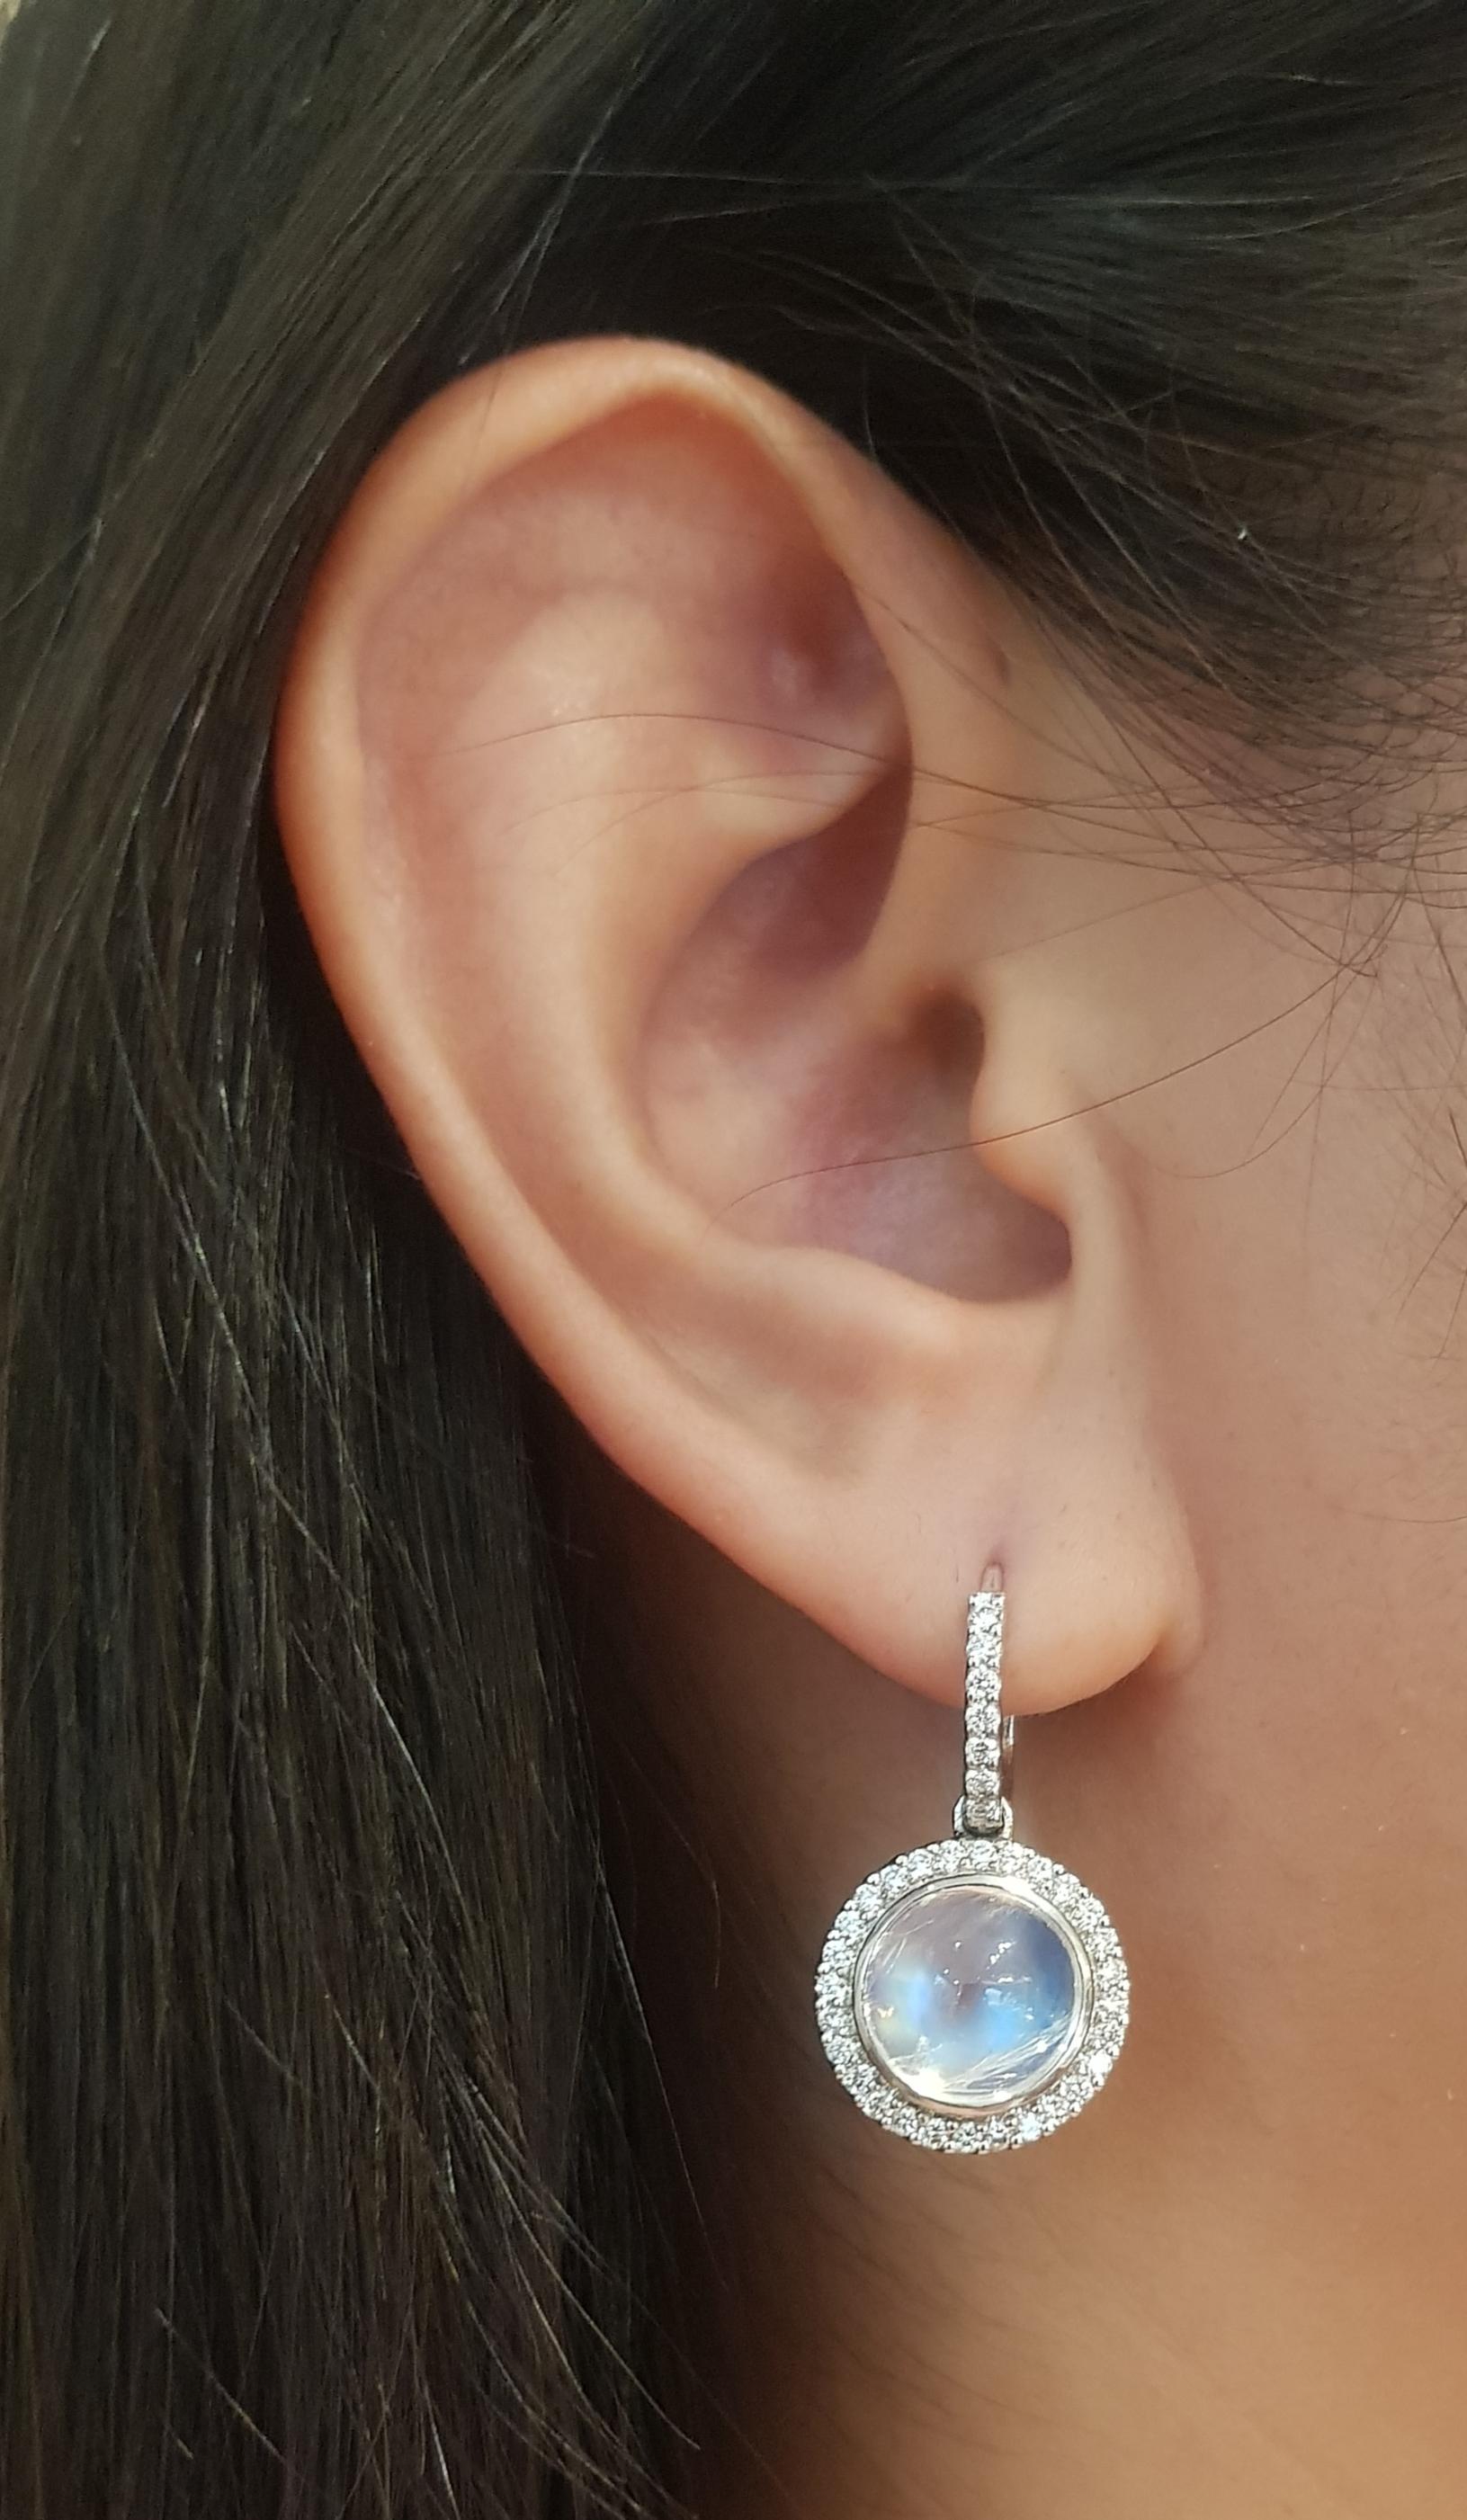 Moonstone 9.06 carats with Diamond 0.75 carat Earrings set in 18K White Gold Settings

Width: 1.4 cm 
Length: 2.5 cm
Total Weight: 9.73 grams

